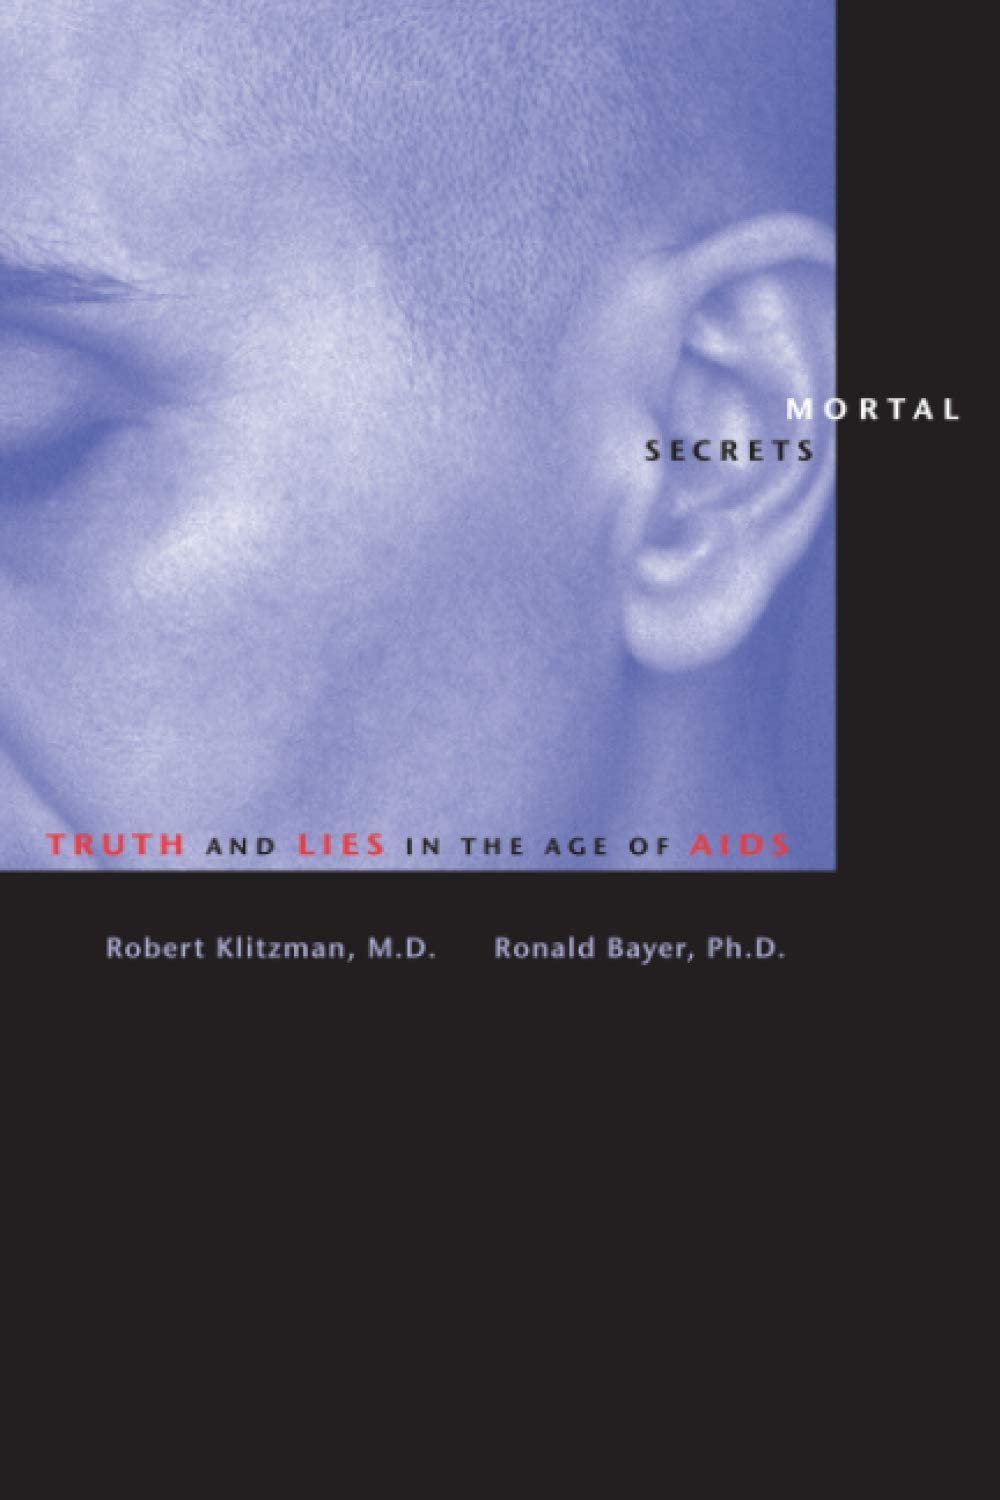 Mortal Secrets: Truth and Lies in the Age of AIDS